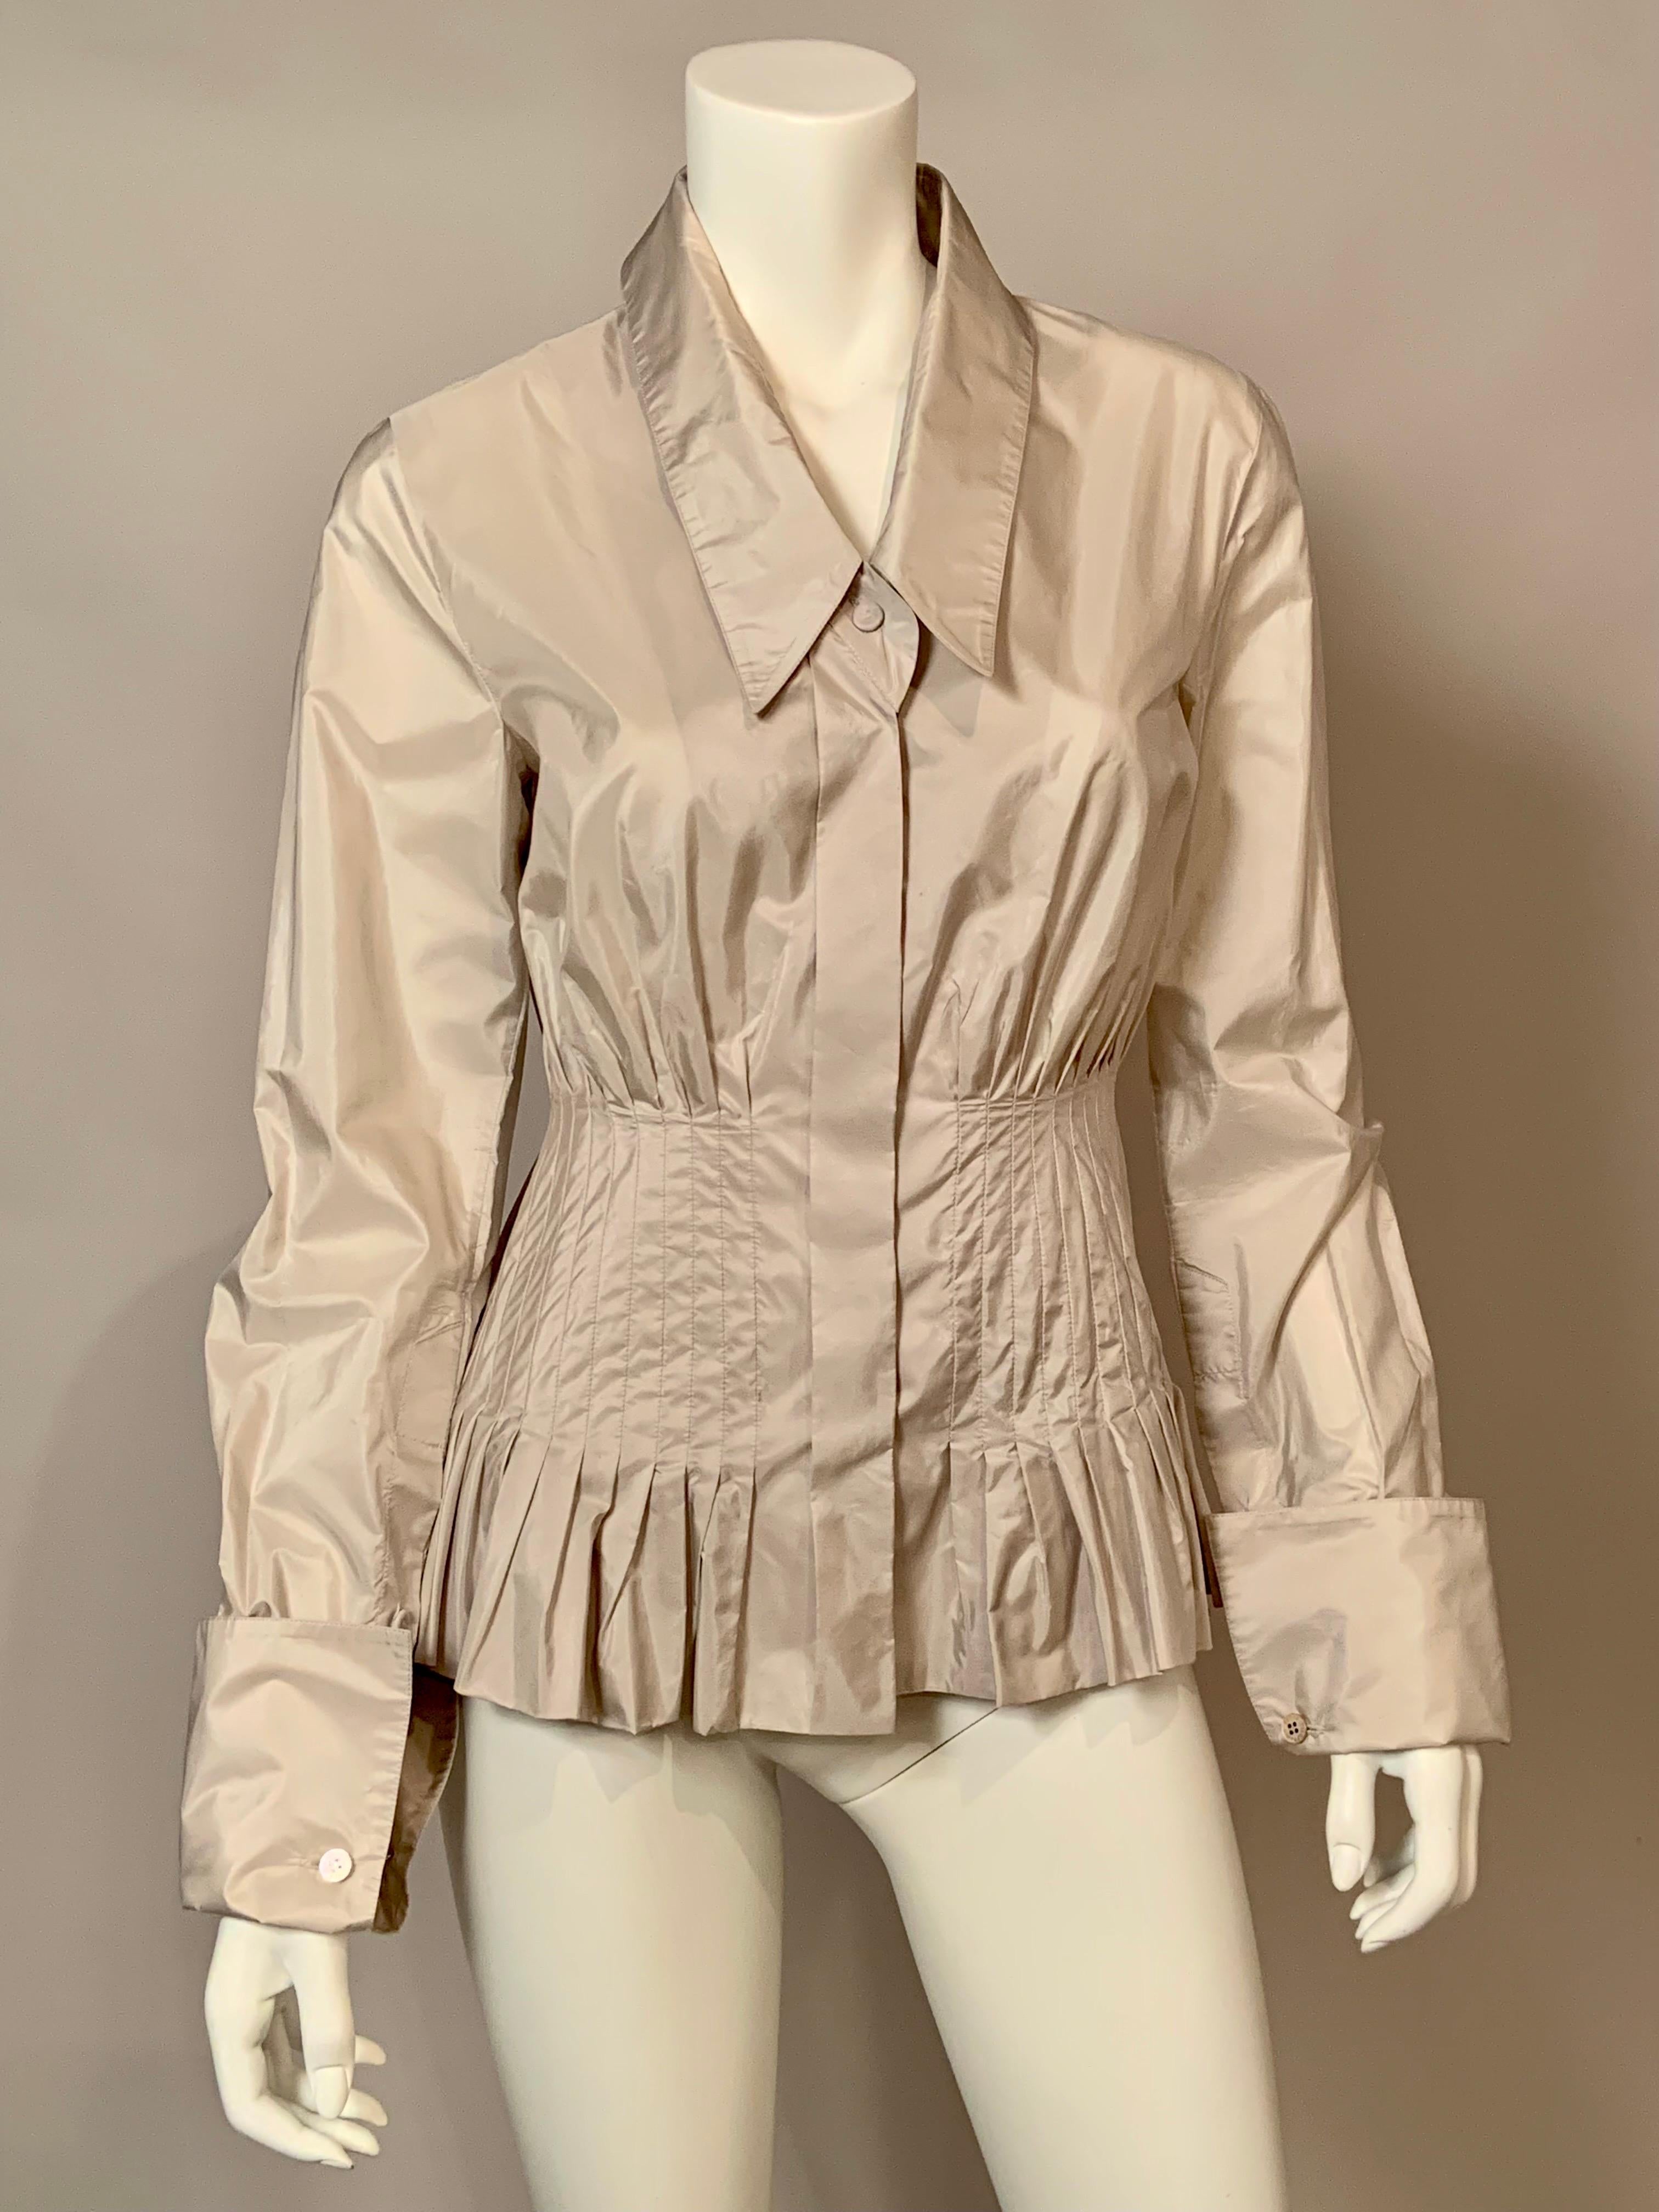 Gianfranco Ferre Designed this pale oyster grey silk blouse  with some interesting details. The button front blouse has a pointed collar, hidden buttons, long sleeves  with French cuffs and cufflinks and a pin tucked waistline with a peplum below. 